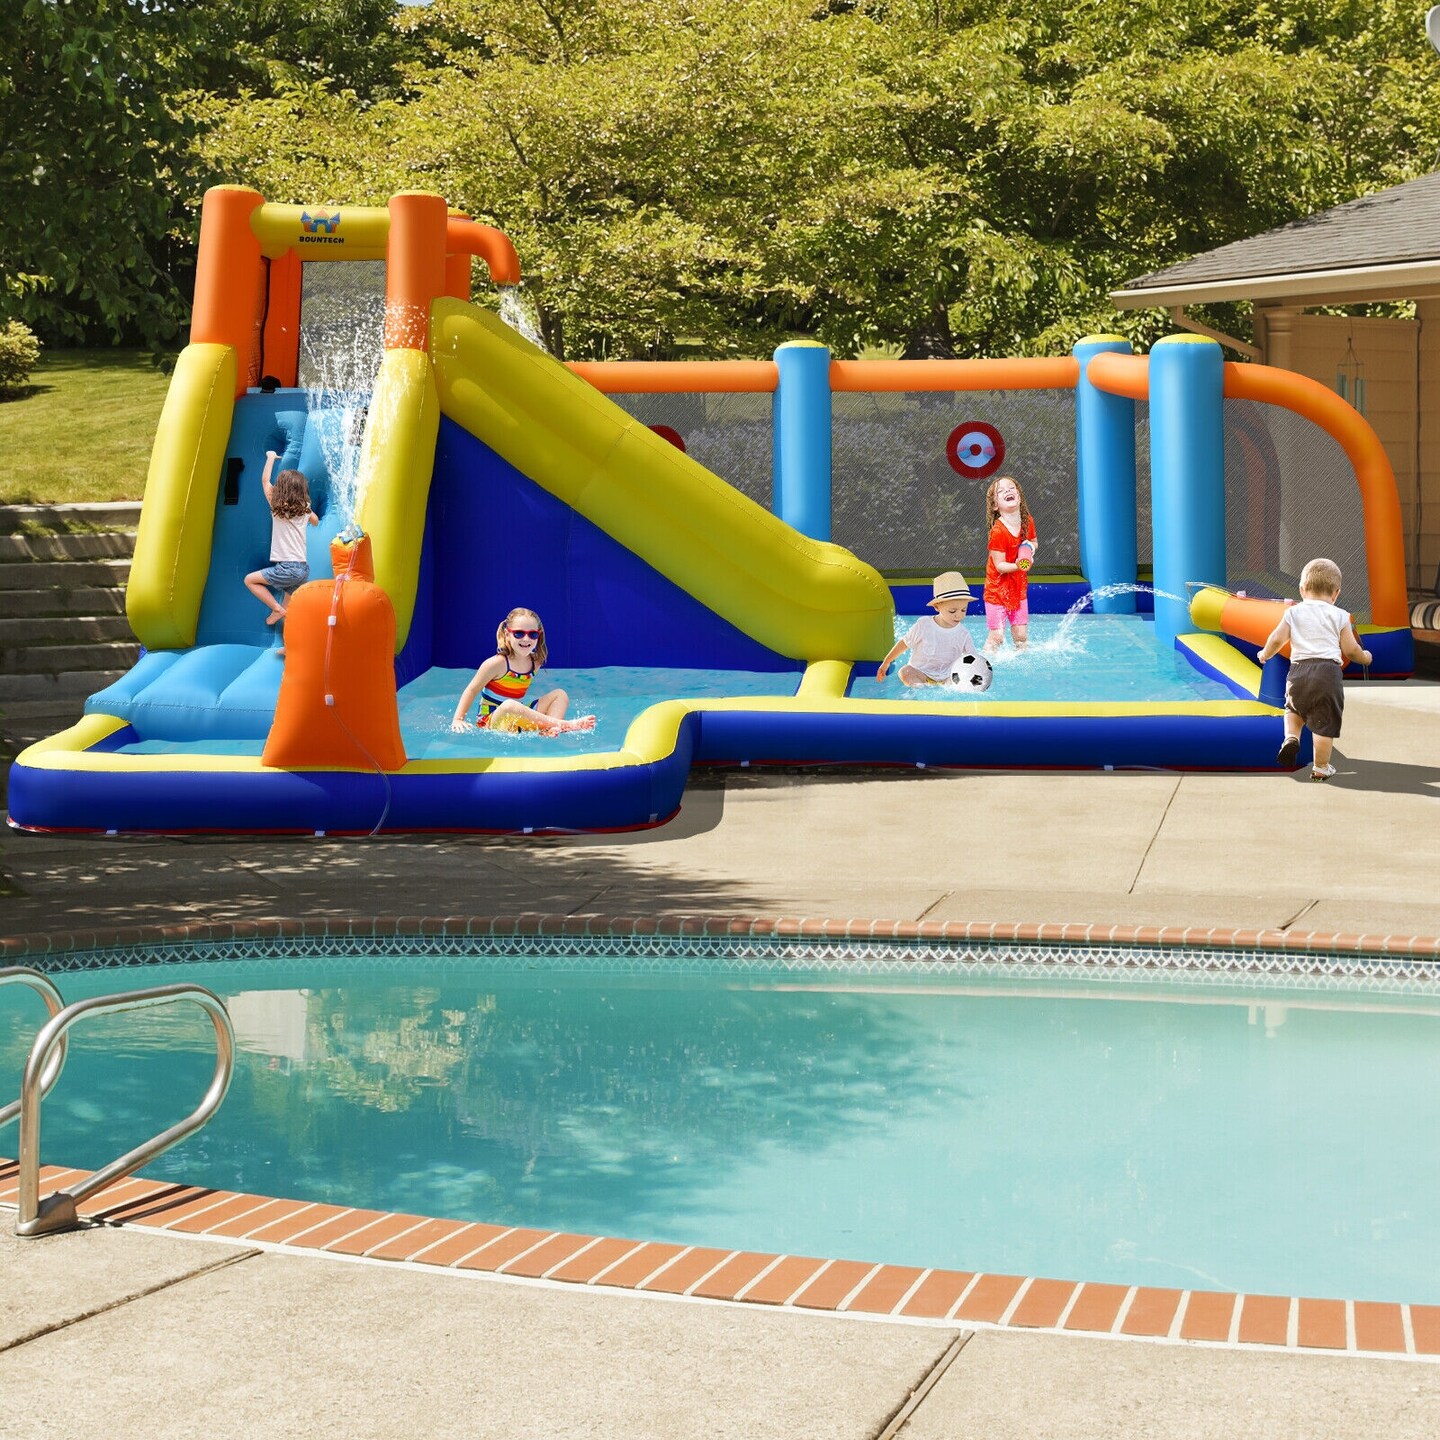 Giant Soccer Themed Inflatable Water Slide Bouncer with Splash Pool